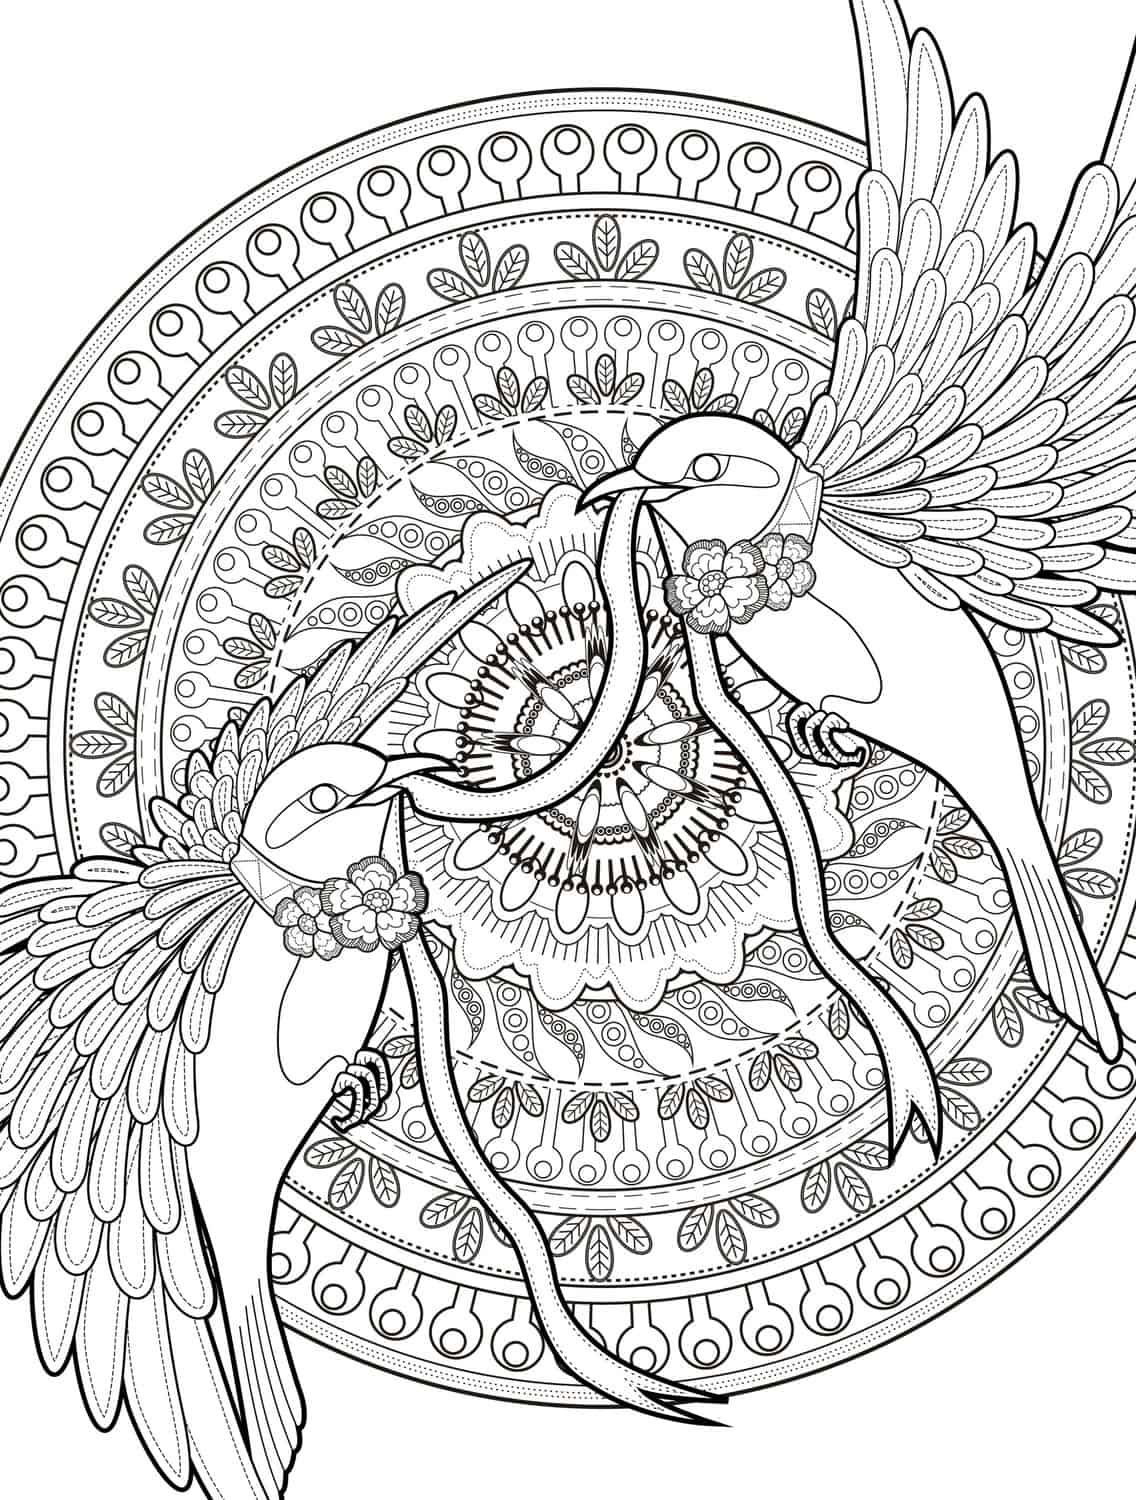 Free Downloadable Thanksgiving Coloring Sheets